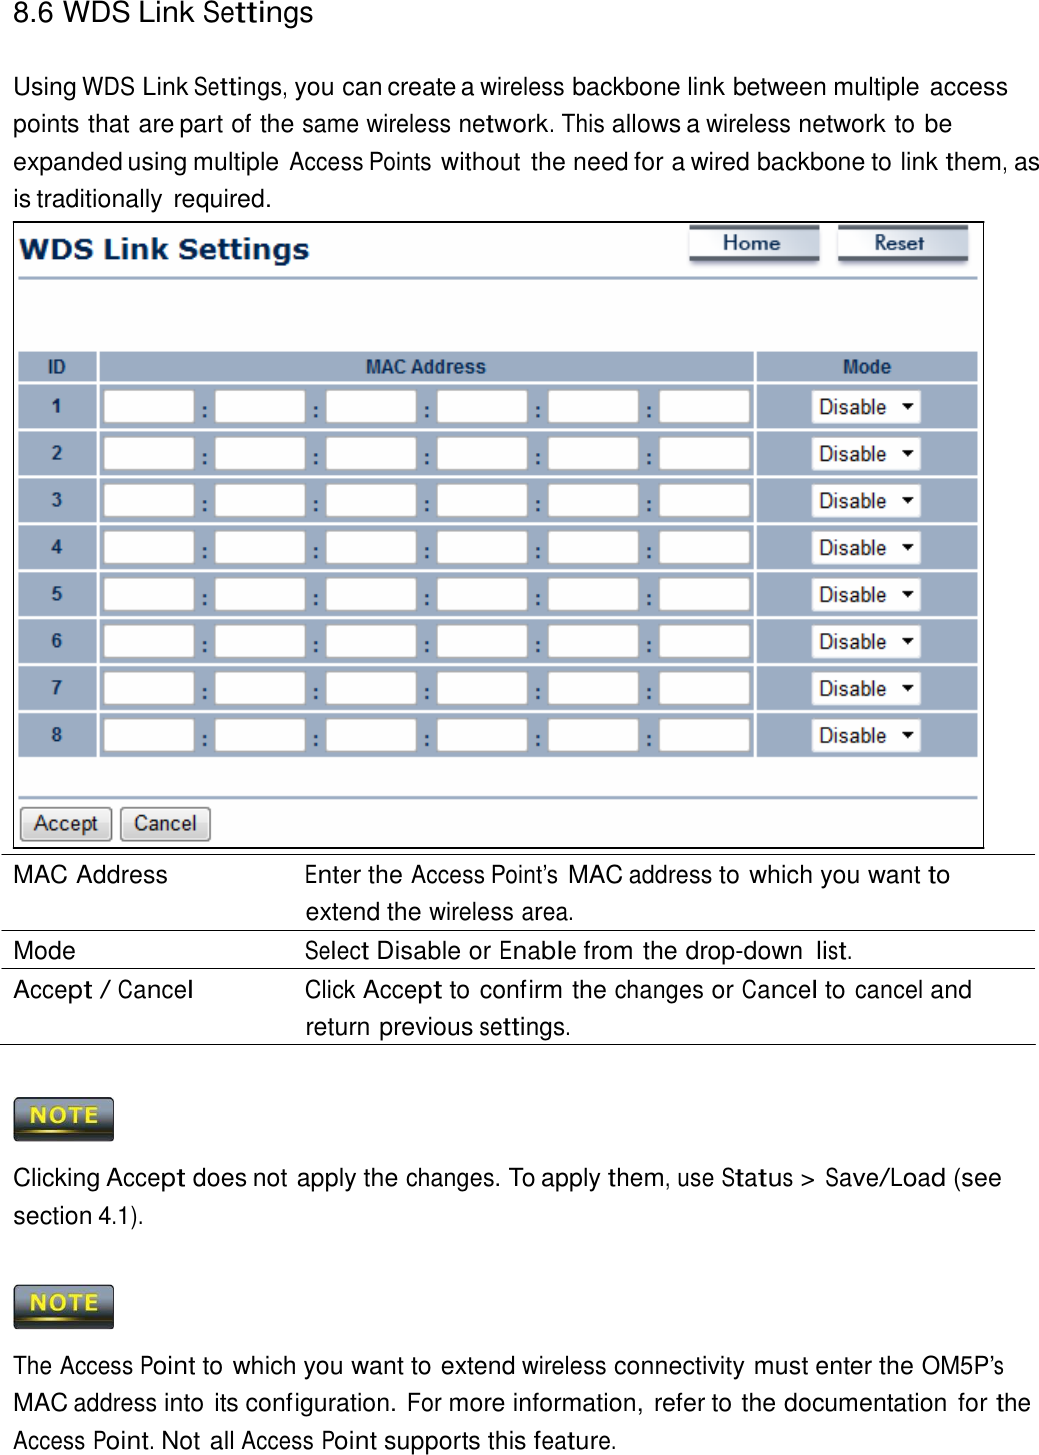 8.6 WDS Link Settings    Using WDS Link Settings, you can create a wireless backbone link between multiple access points that are part of the same wireless network. This allows a wireless network to be expanded using multiple Access Points without the need for a wired backbone to link them, as is traditionally required.                                MAC Address  Enter the Access Point’s MAC address to which you want to extend the wireless area. Mode  Select Disable or Enable from the drop-down list. Accept / Cancel Click Accept to confirm the changes or Cancel to cancel and return previous settings.      Clicking Accept does not apply the changes. To apply them, use Status &gt; Save/Load (see section 4.1).      The Access Point to which you want to extend wireless connectivity must enter the OM5P’s MAC address into its configuration. For more information, refer to the documentation for the Access Point. Not all Access Point supports this feature. 